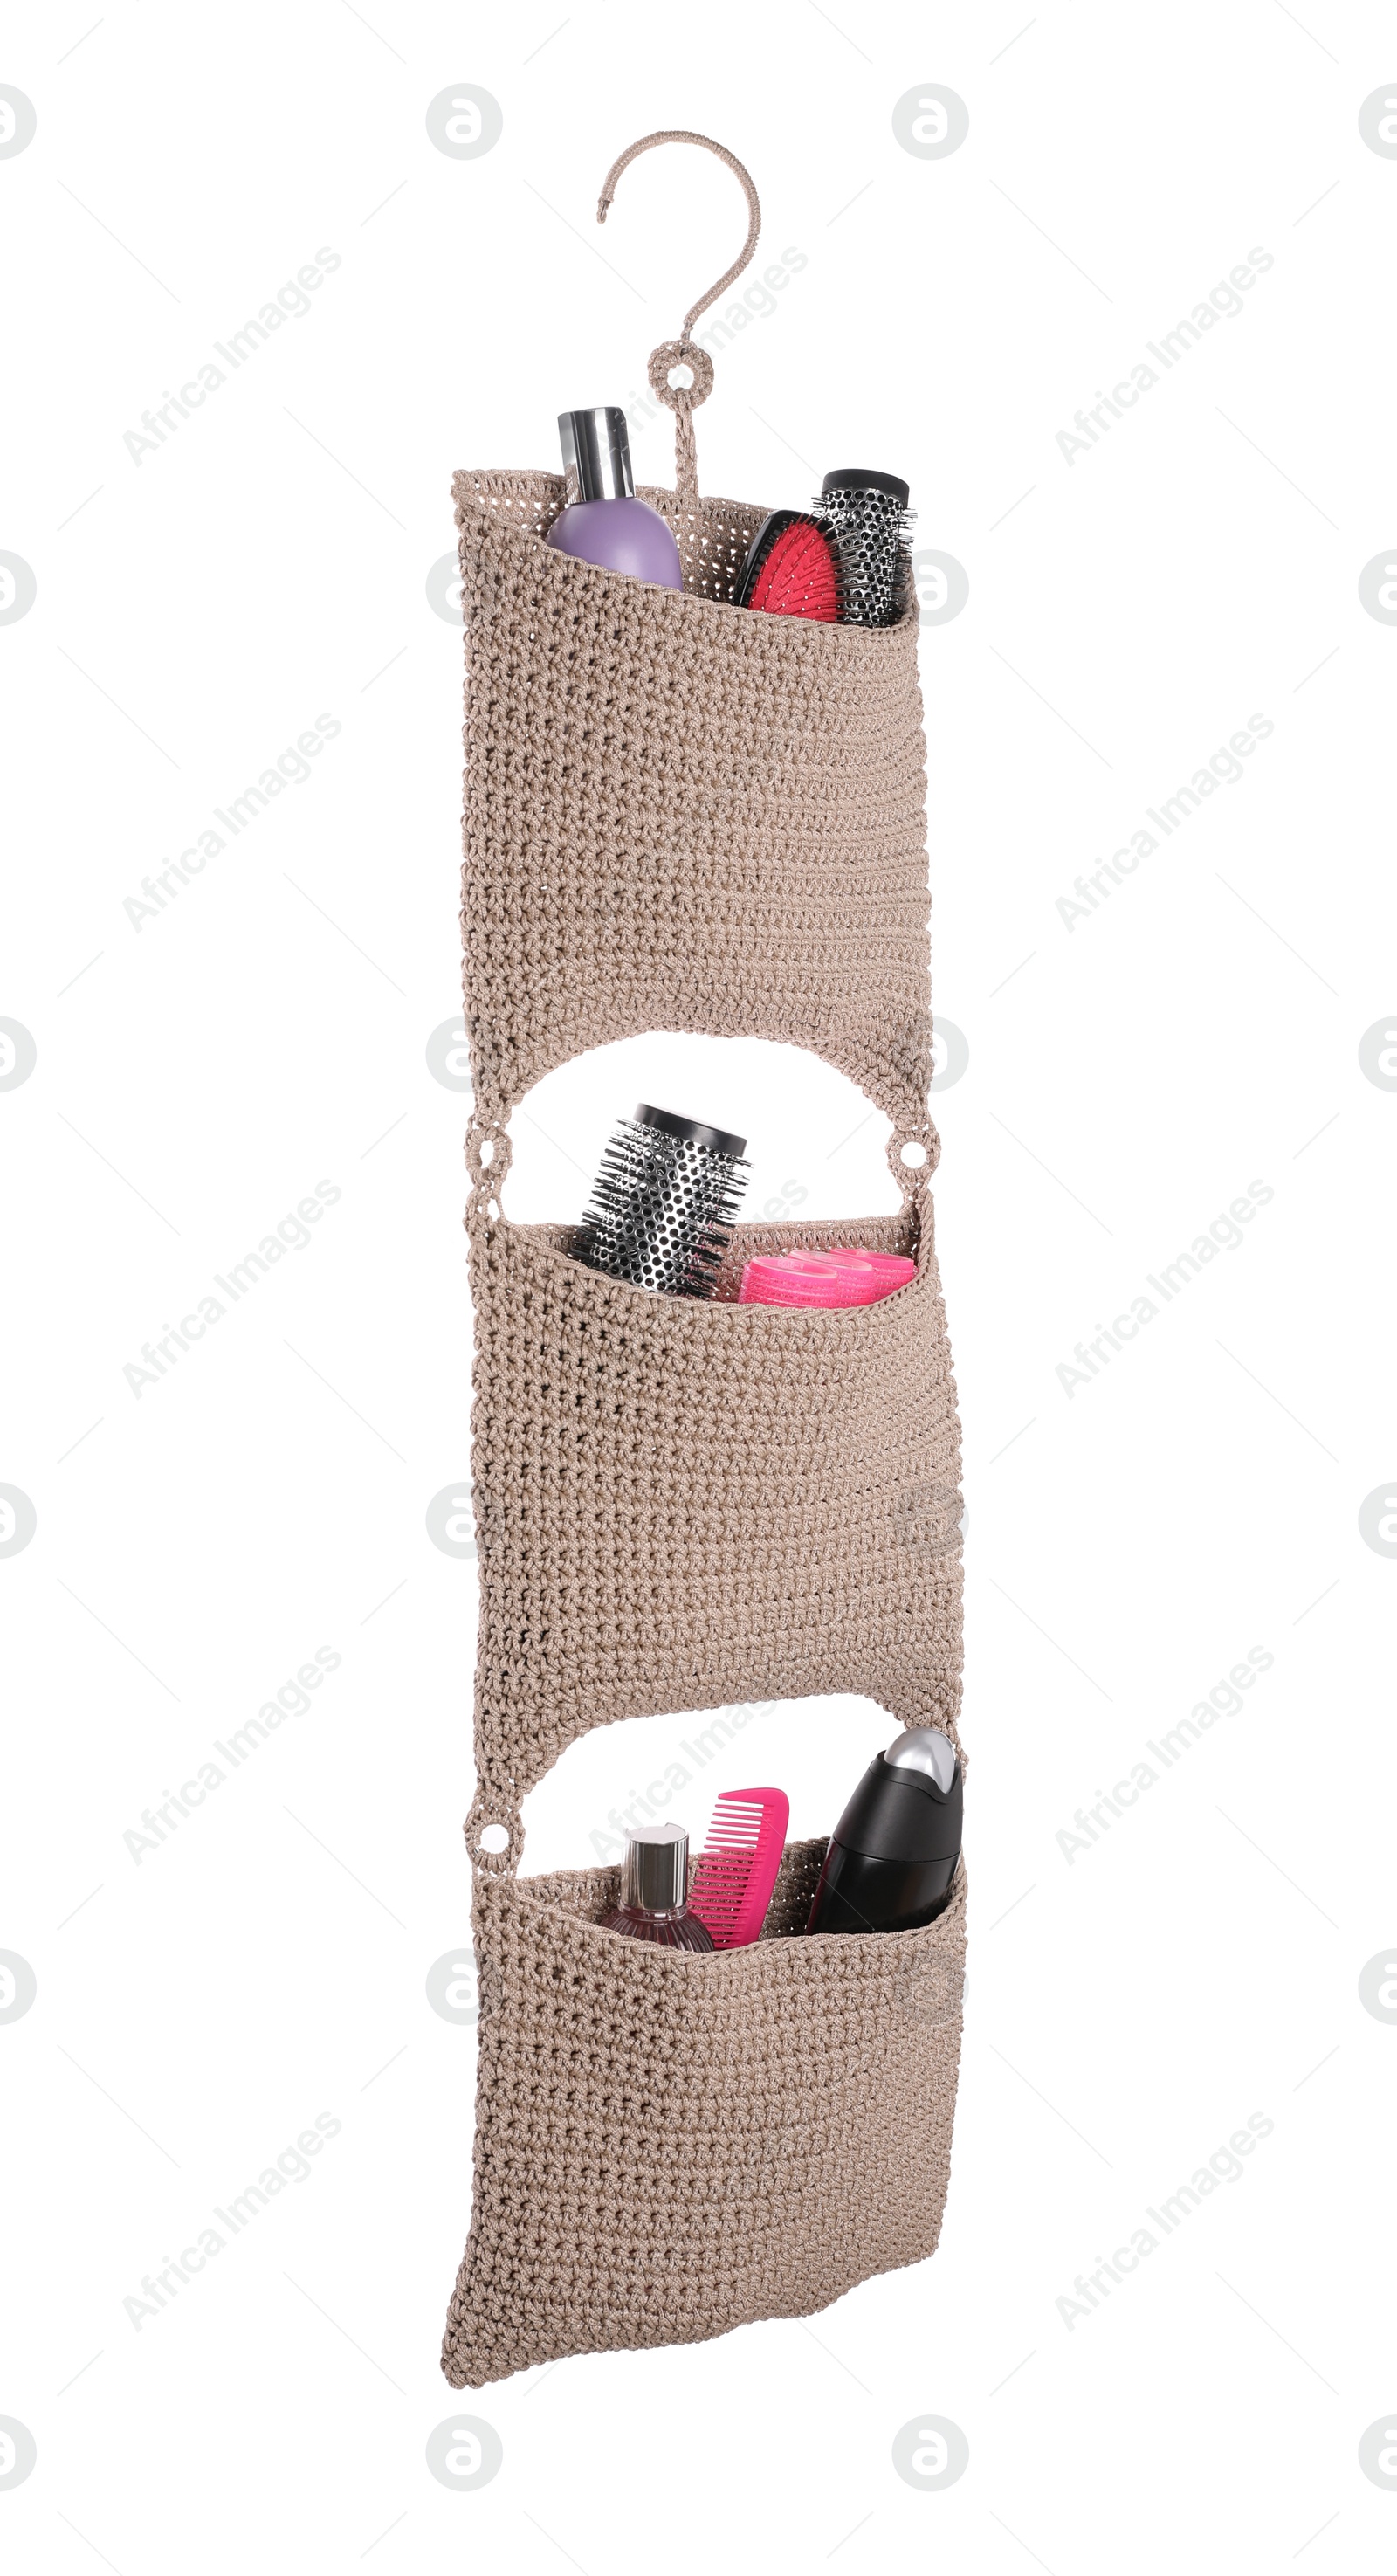 Photo of Stylish knitted organizer with toiletries and hair brushes on white background. Bath accessory